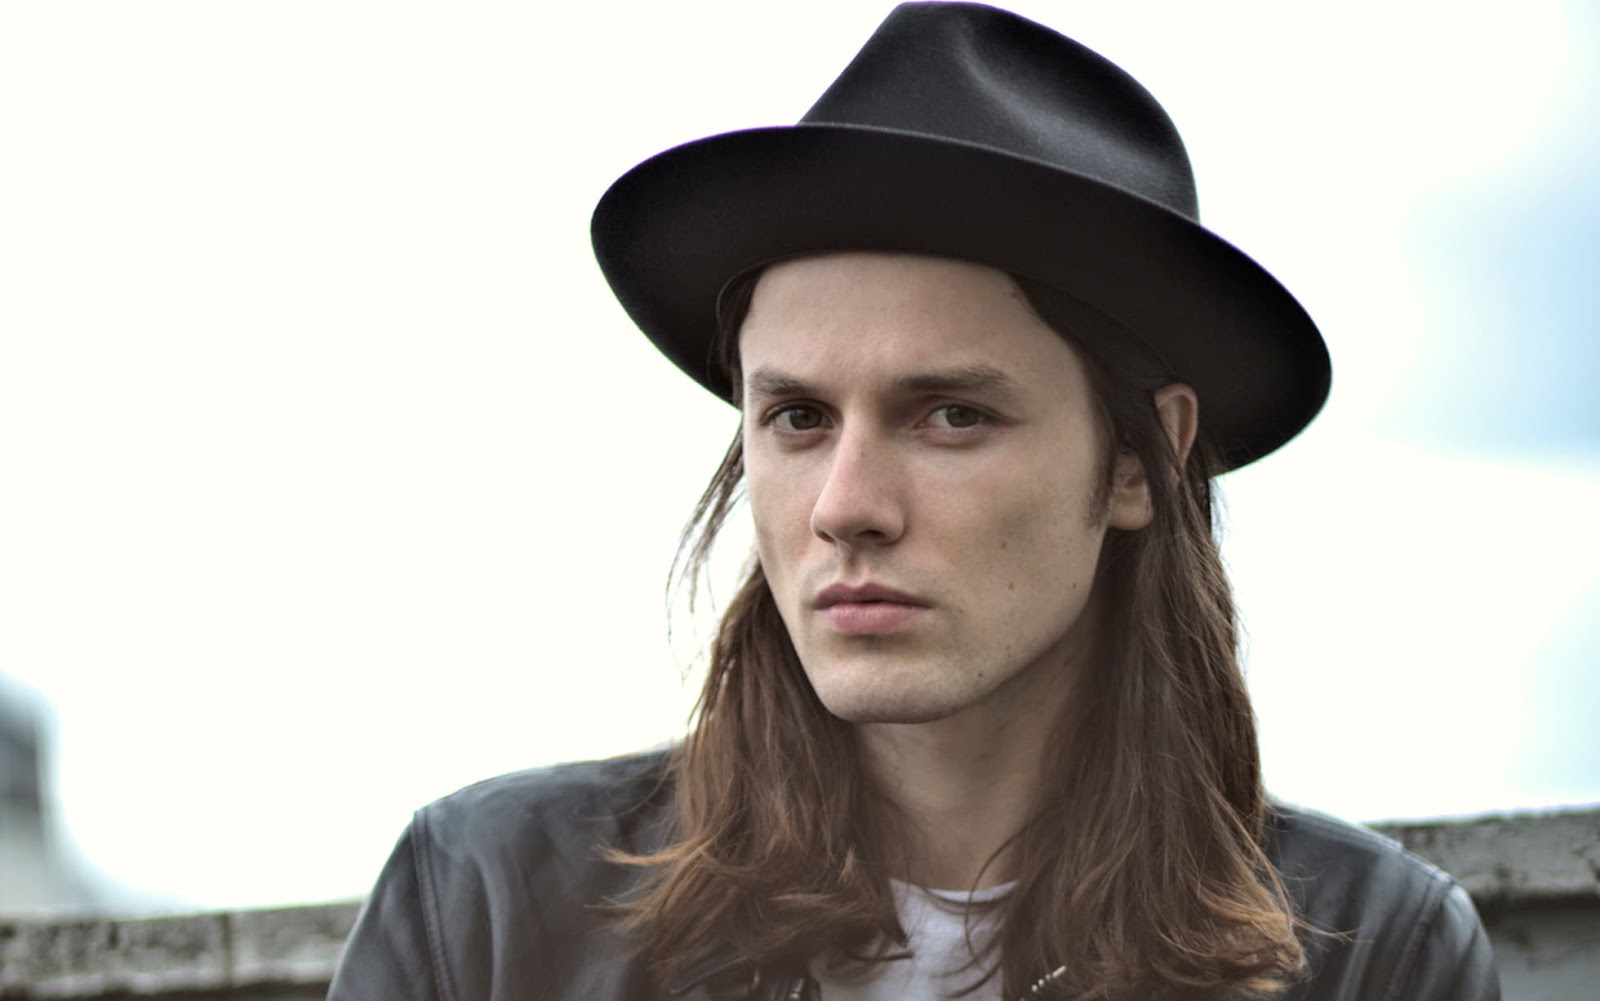 Chicago Charmed: James Bay’s Enthralling Performance